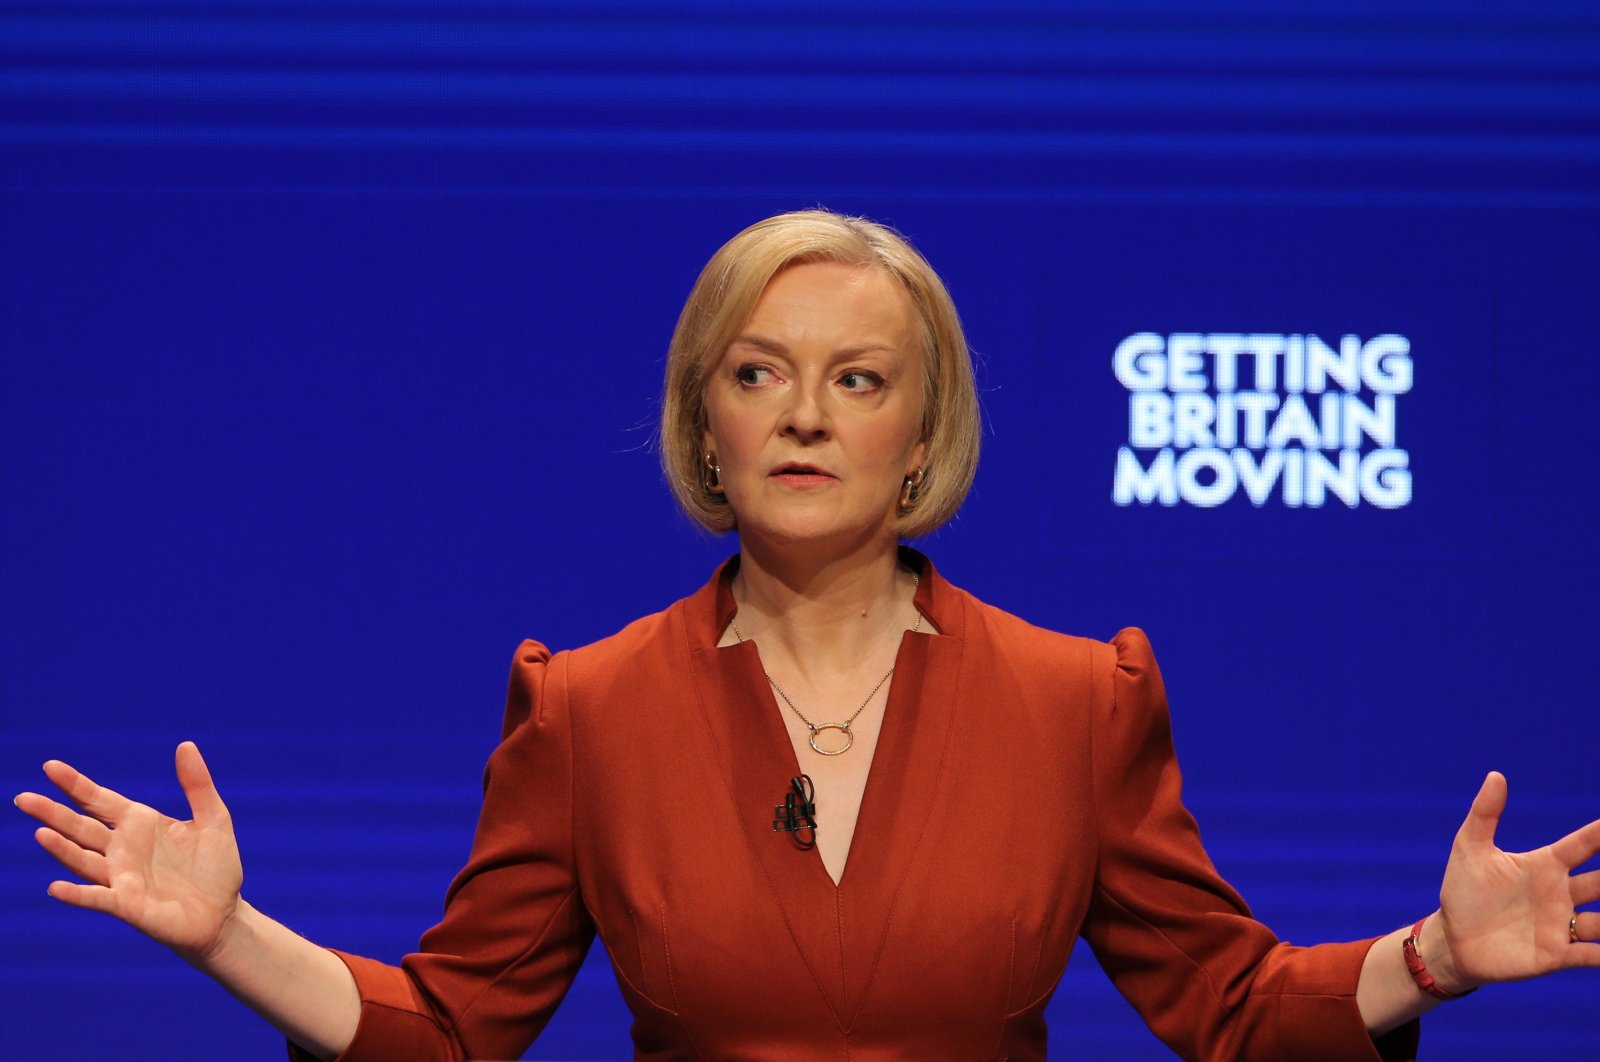 British Prime Minister Liz Truss delivers her keynote speech at the Conservative Party Conference, Birmingham, Britain, Oct. 5, 2022. (EPA Photo)